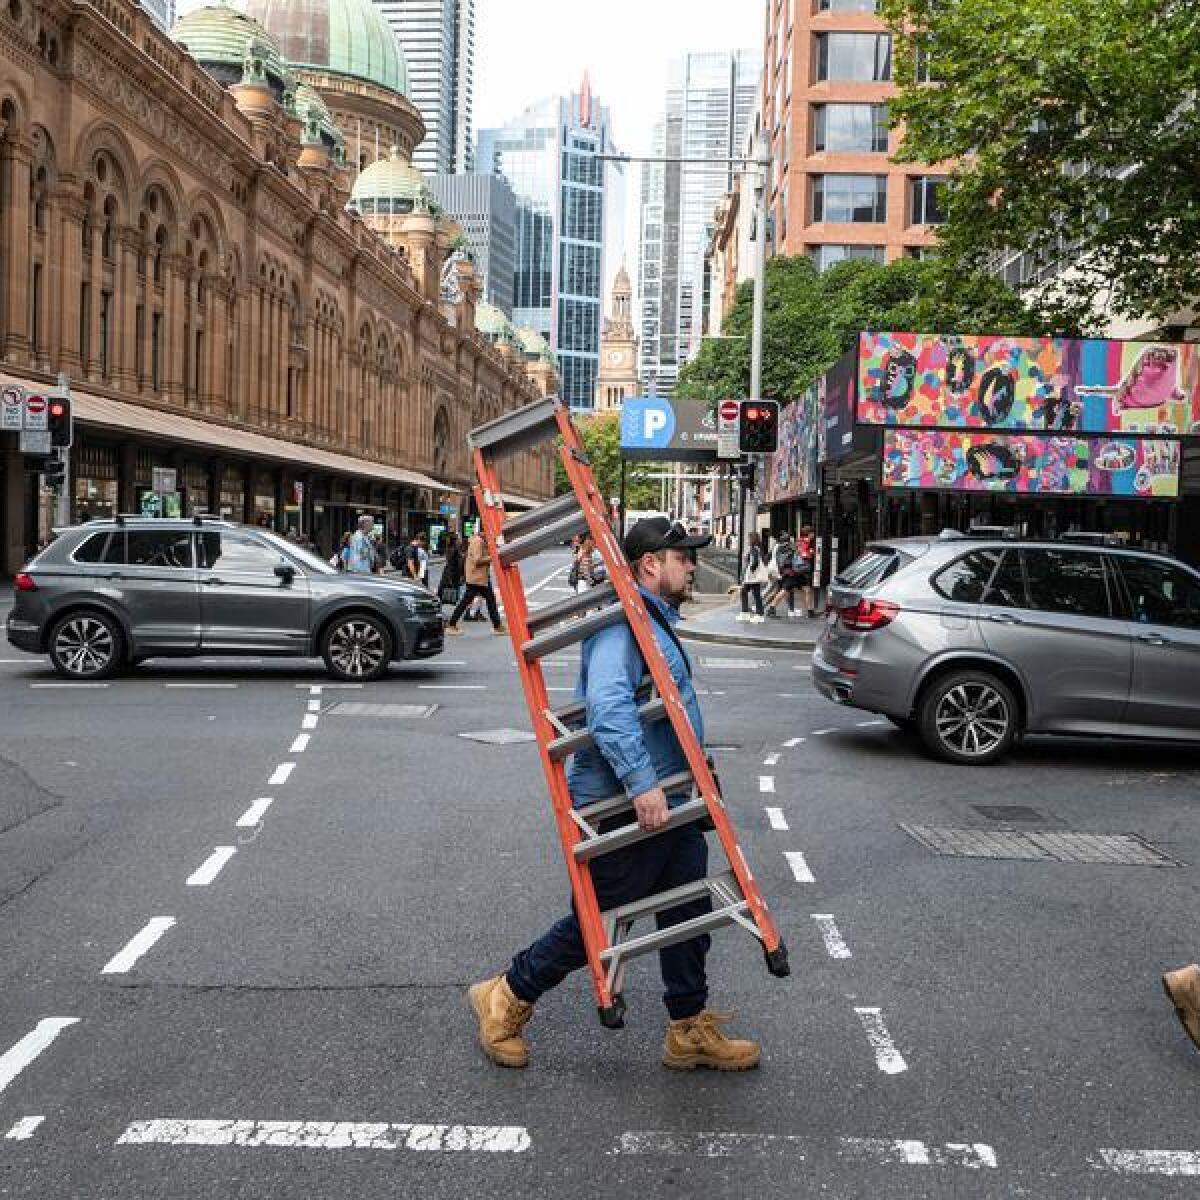 Workmen crossing a road carrying a ladder.